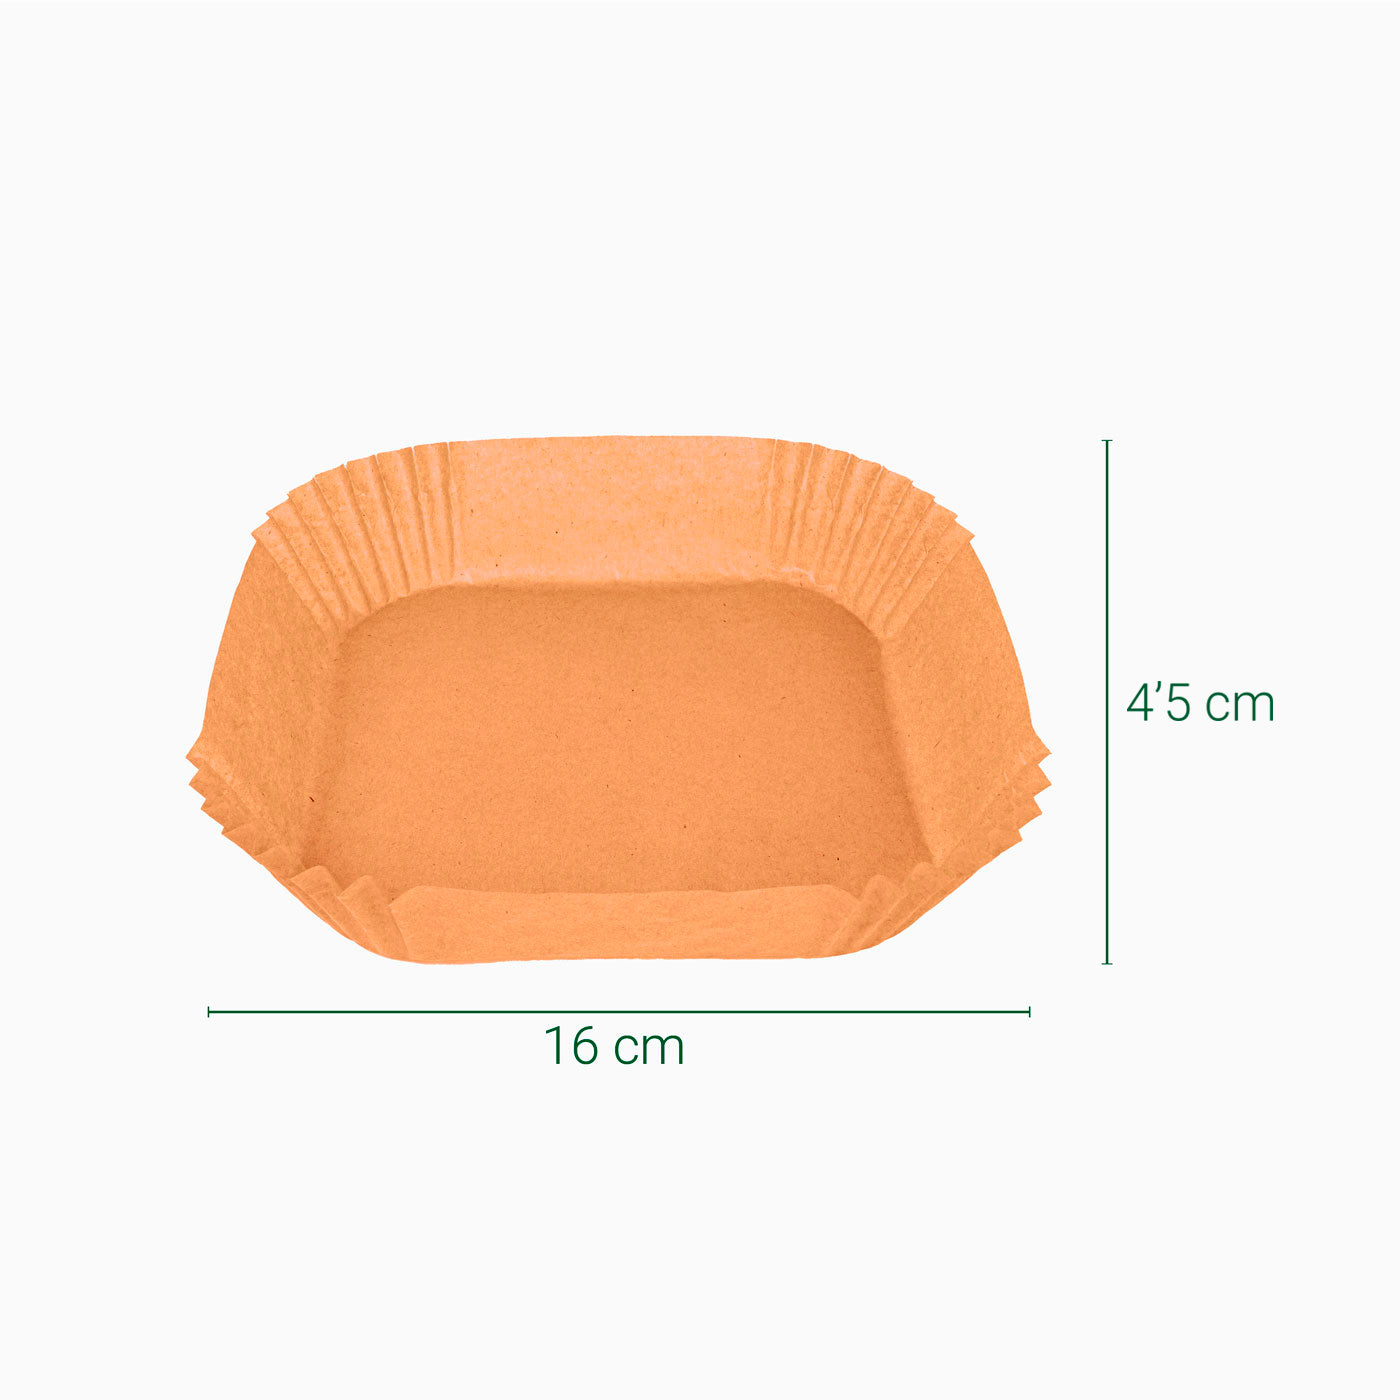 Siliconed paper mold square airfryer 16 x 16 x 4.5 cm